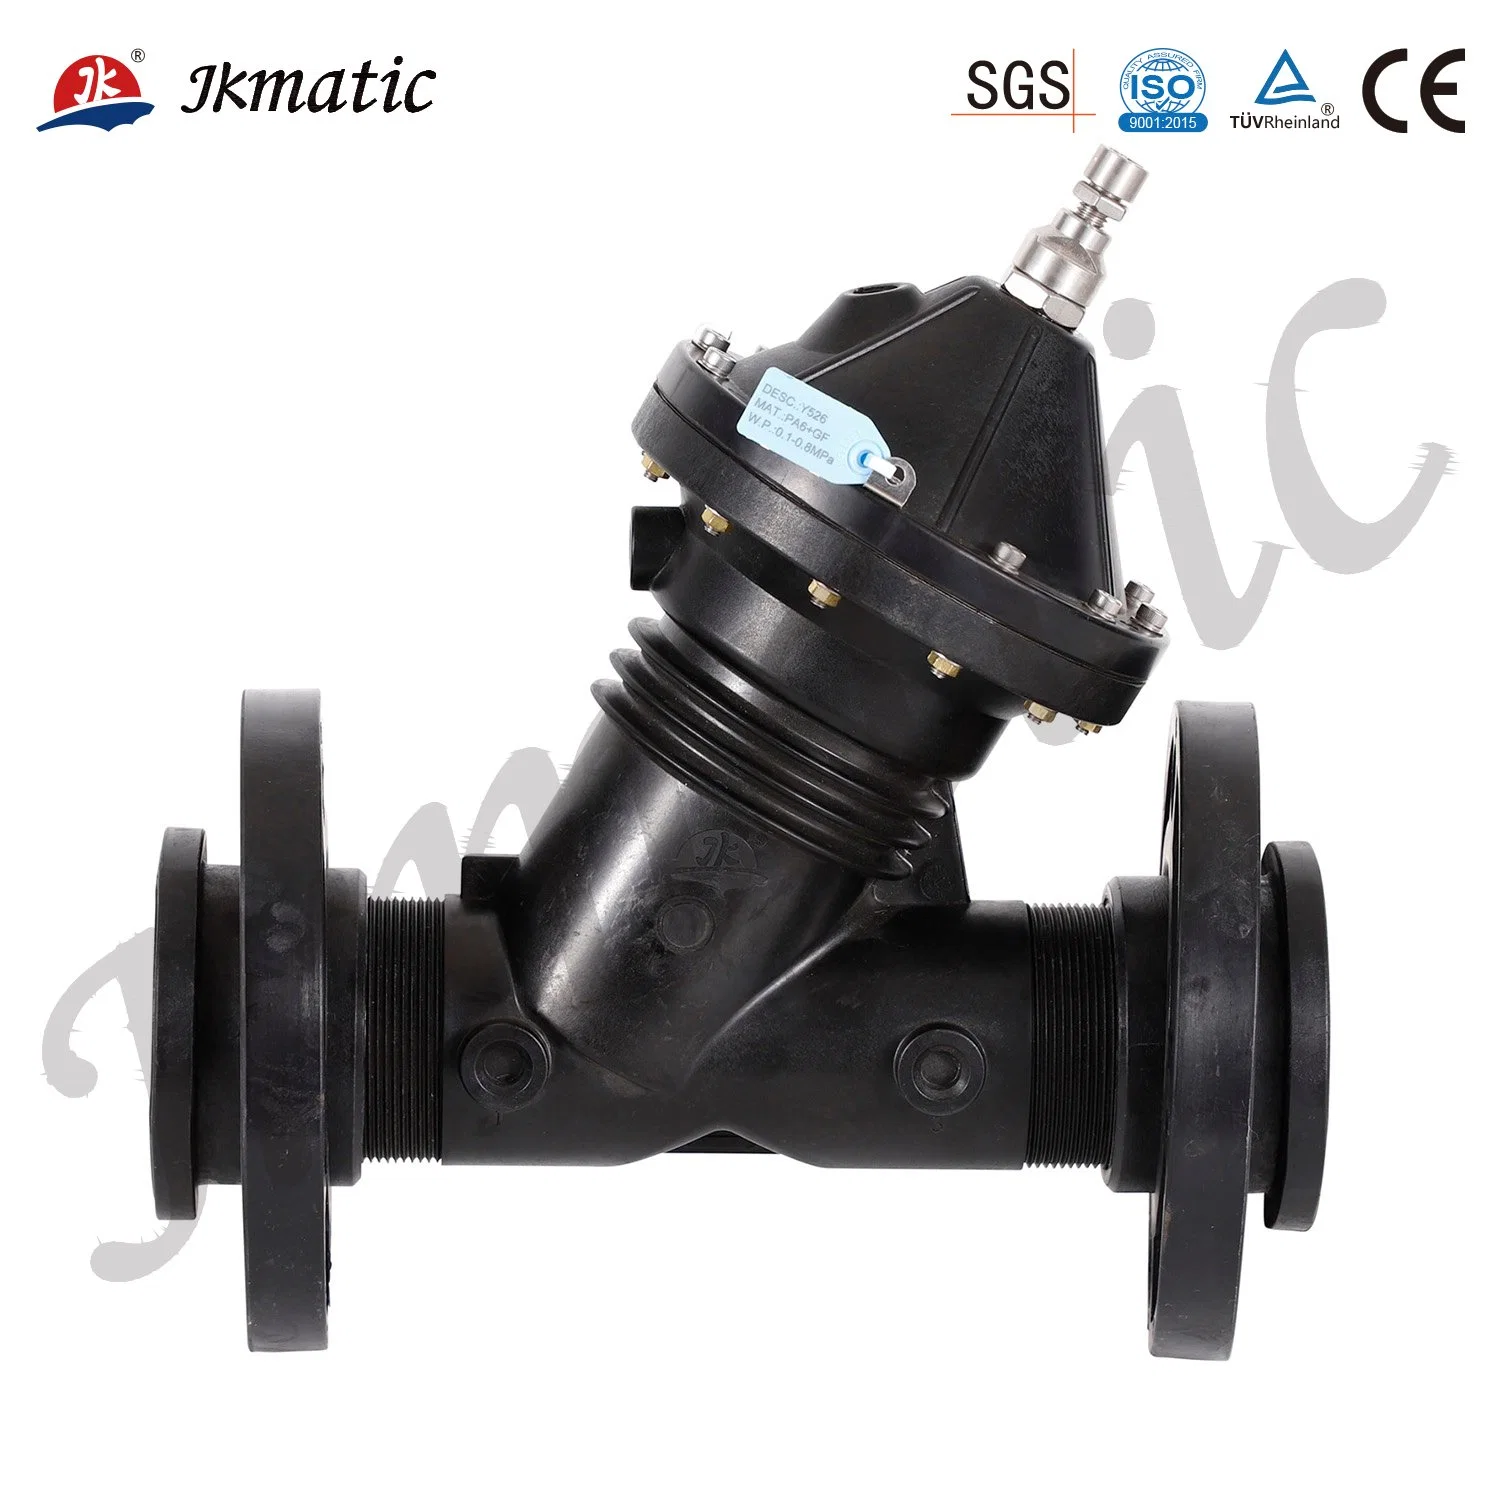 2" Automatic Switch Hydraulic Control Diaphragm Valve for Industrial Water Multi-Media Filter